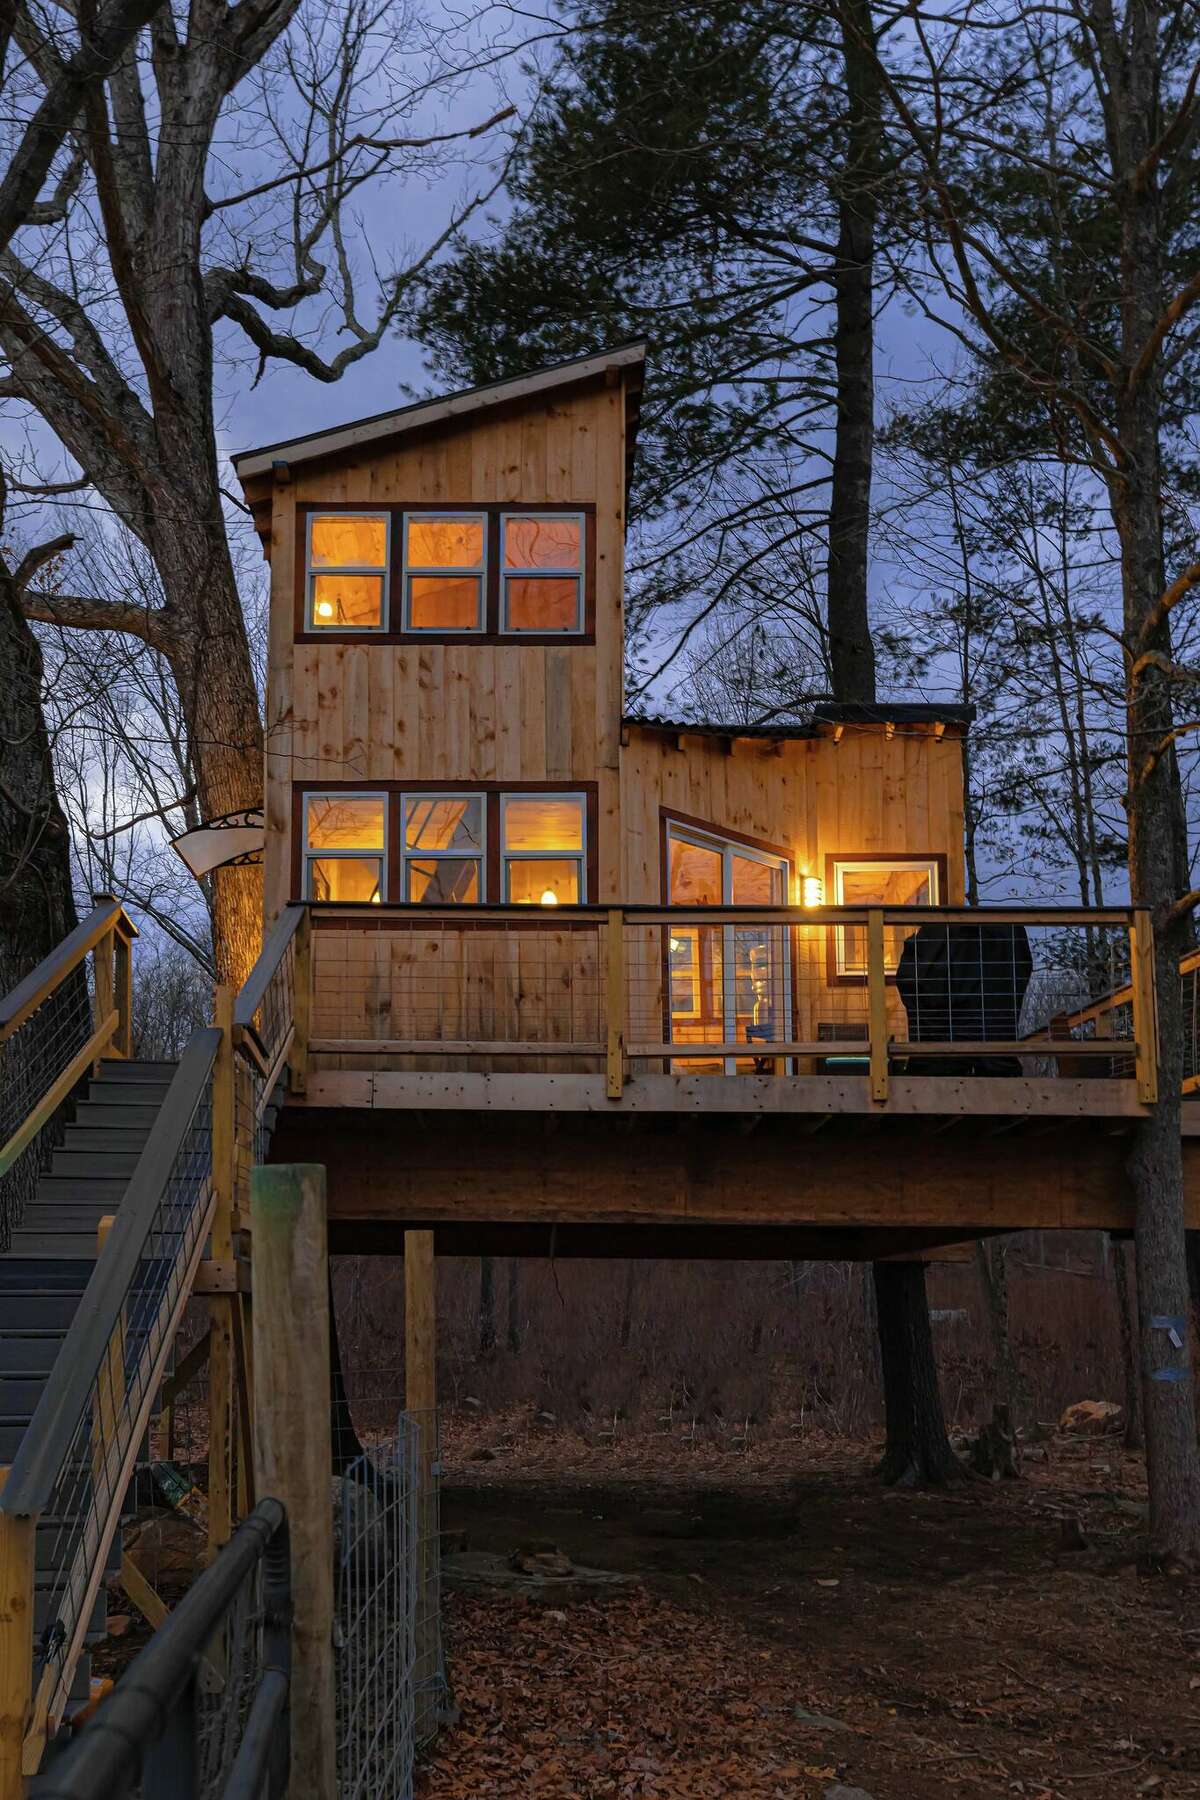 Stairs lead up to a two-story wood cabin sitting on a wooden platform, surrounded by trees. It is nearly sundown and lights are on inside the cabin and by the front door.